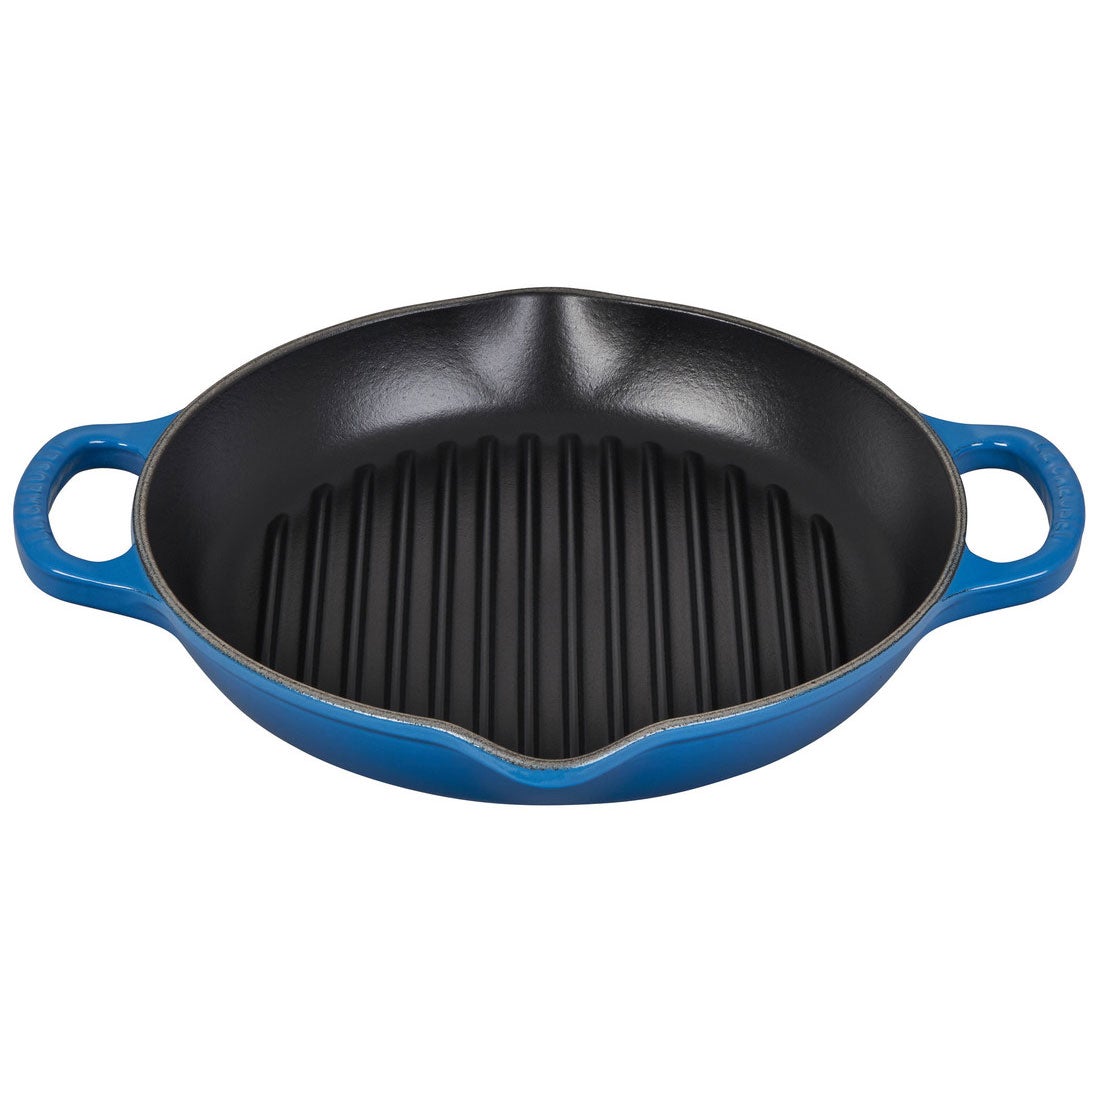 NEW Le Creuset Enameled Cast Iron Giant Reversible Grill/Griddle